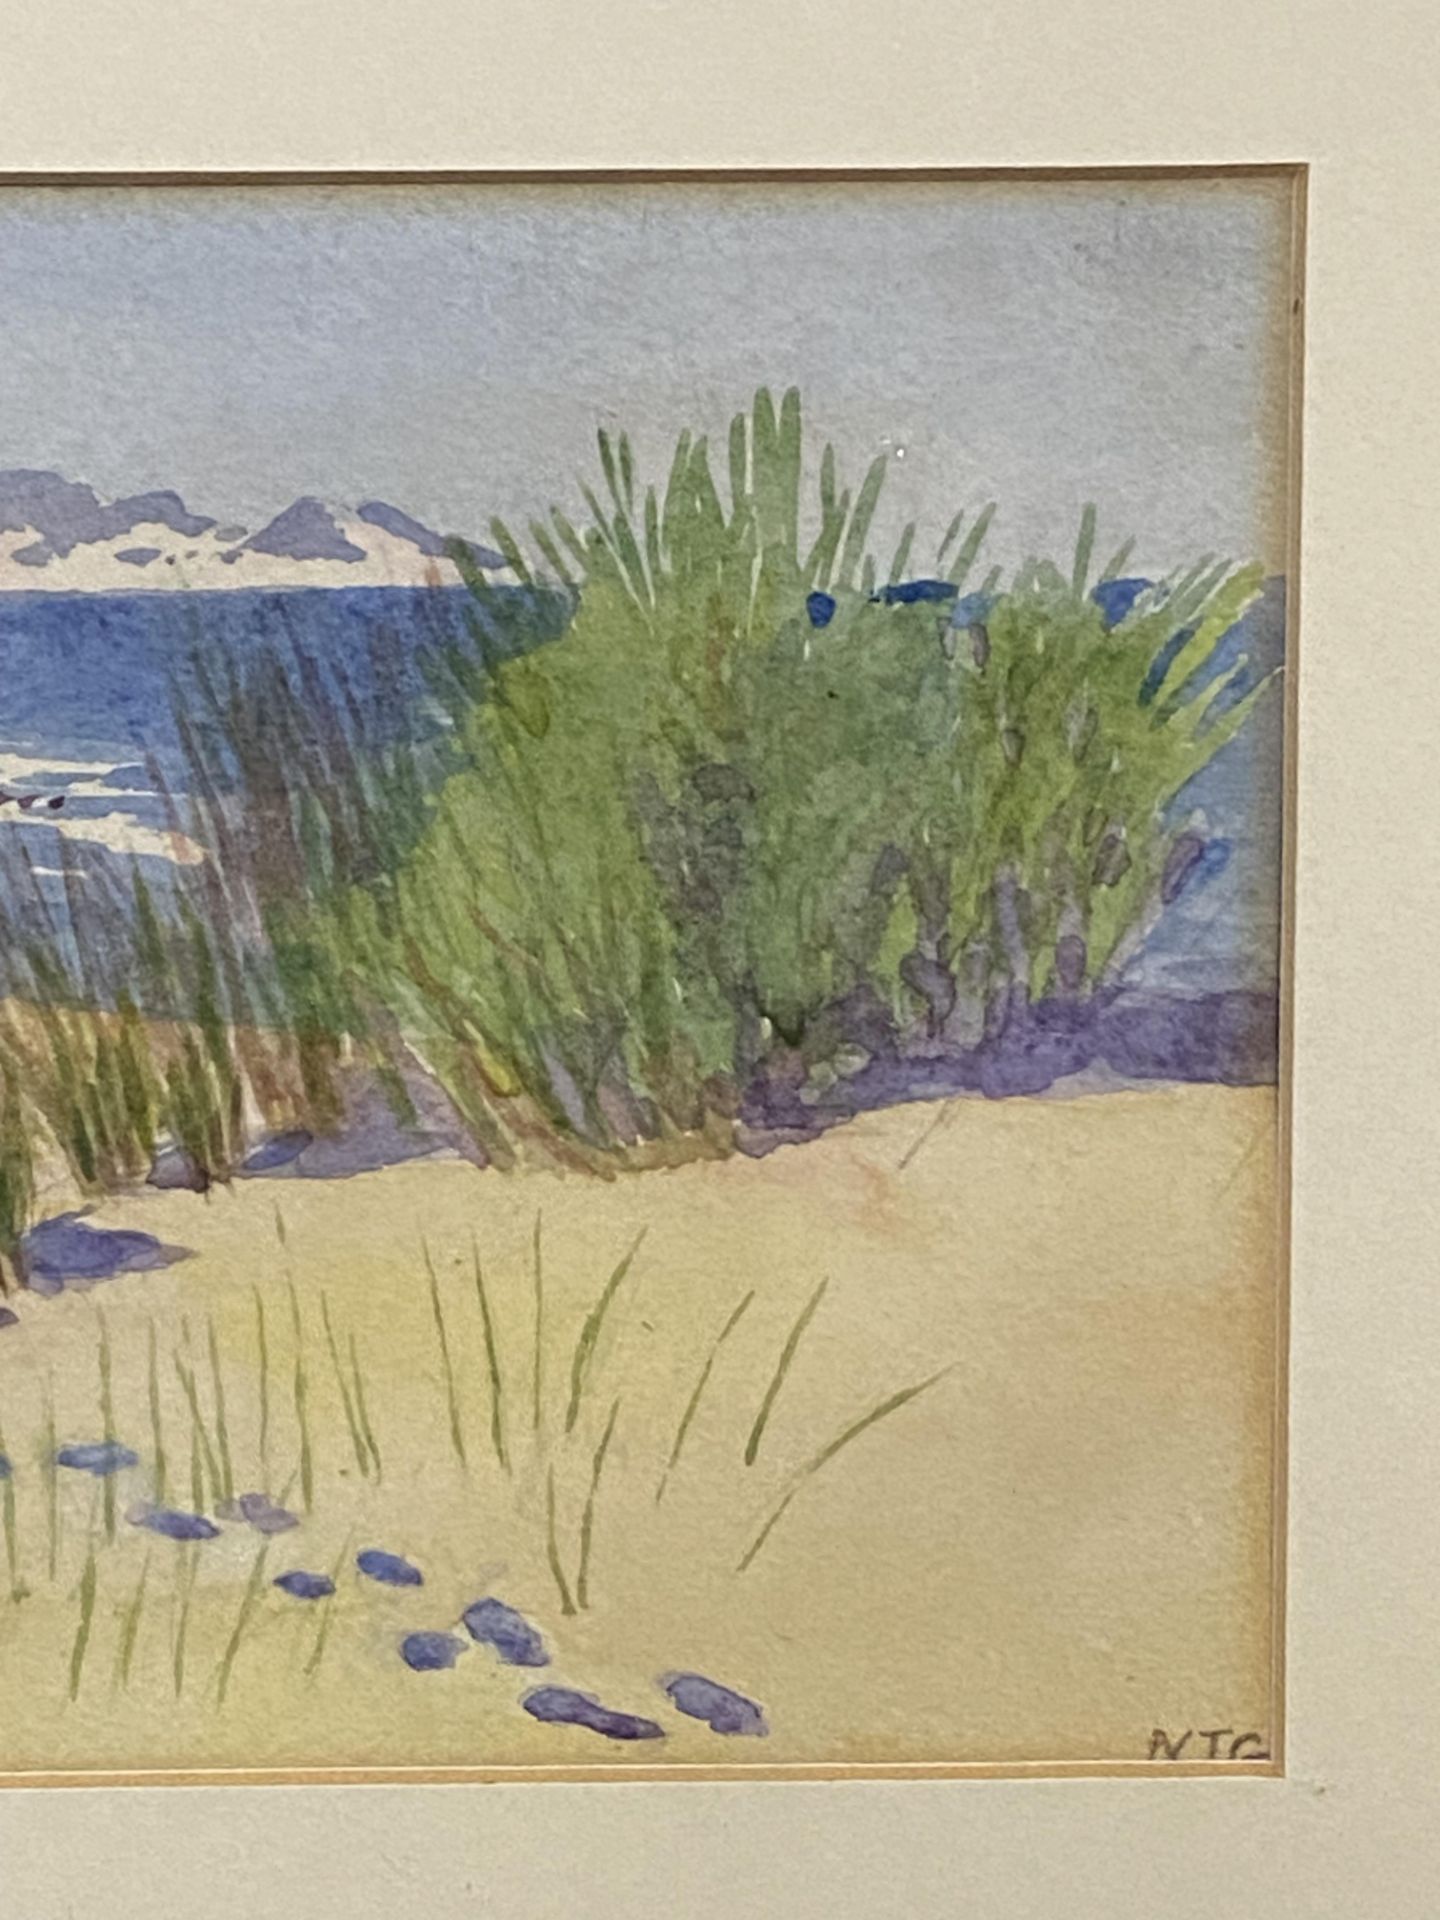 Framed and glazed watercolour of a beach initialed NTG - Image 4 of 4